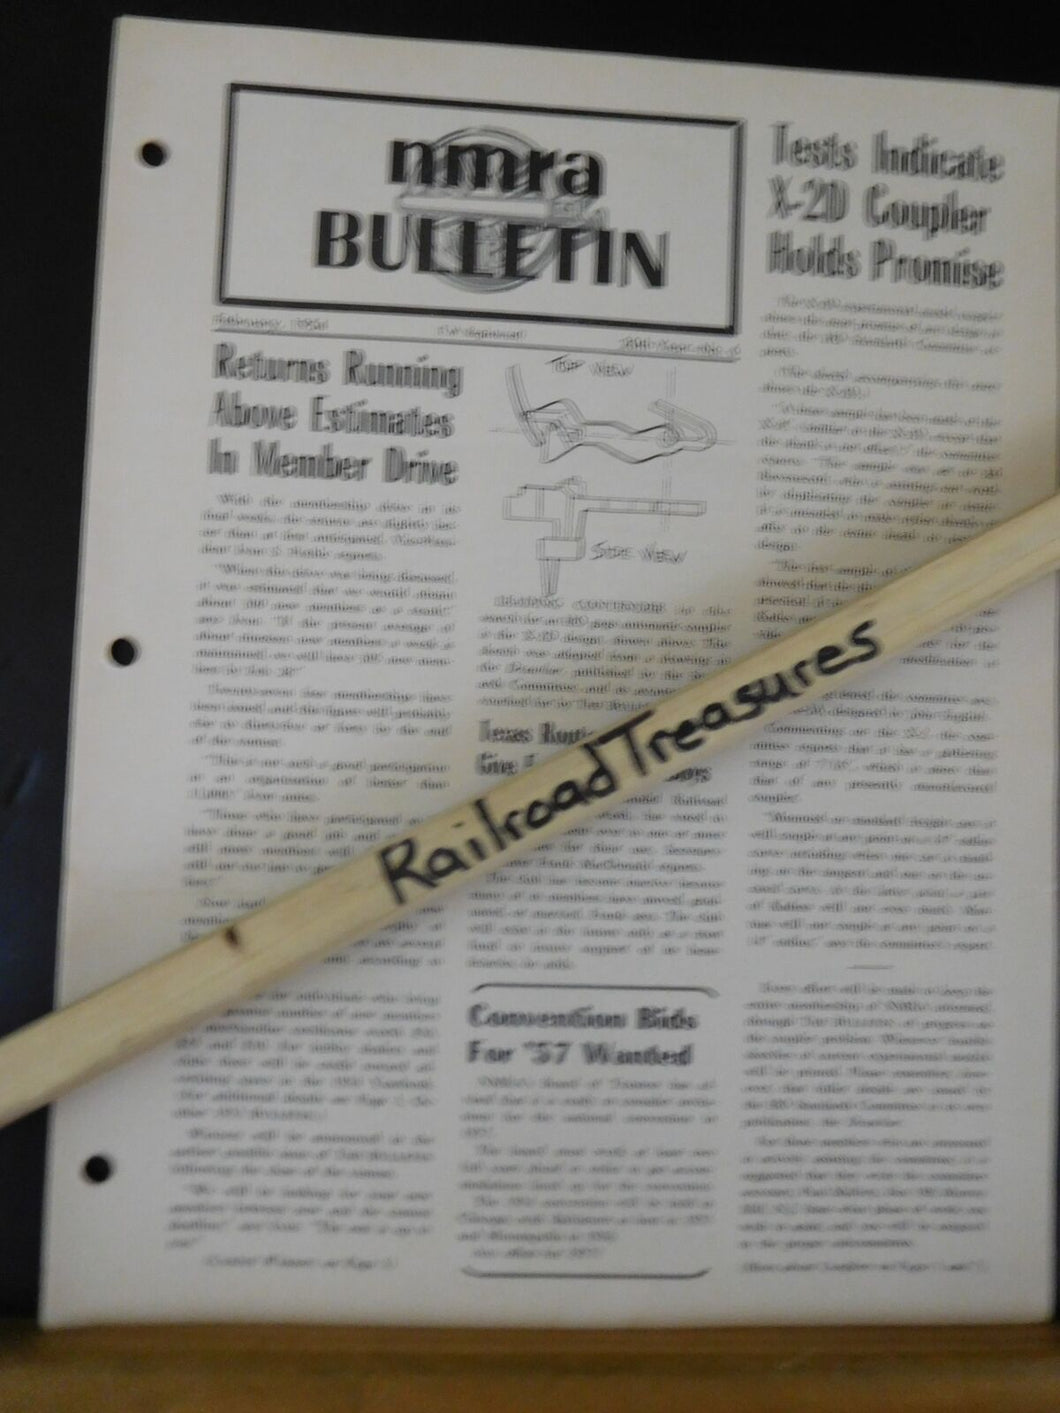 NMRA Bulletin 1954 February #6 of 20th Year Tests Indicate X-2D Coupler Holds Pr